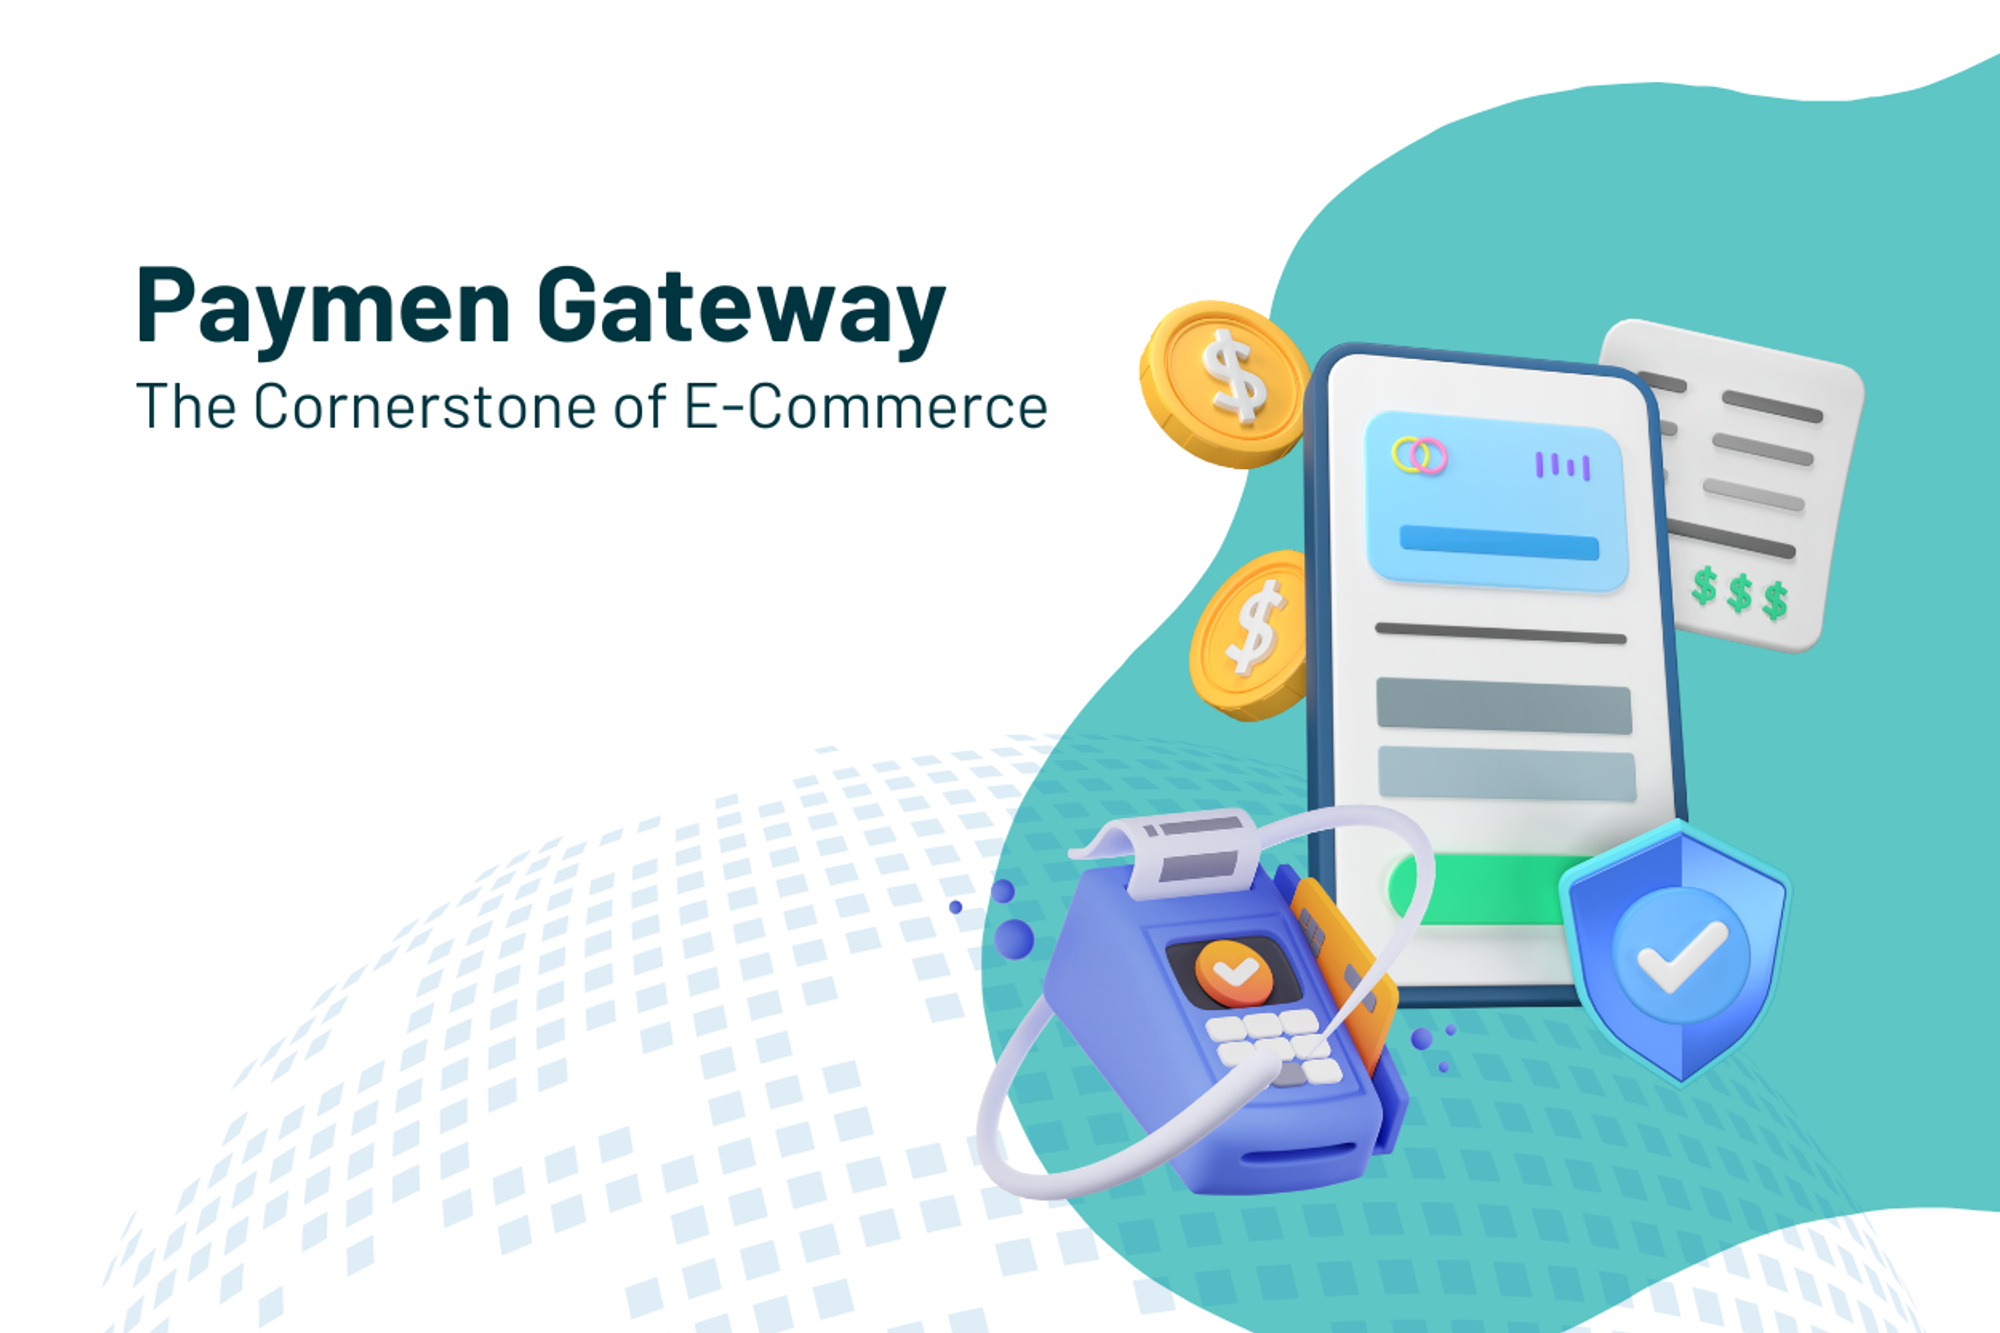 Payment Gateways: The Cornerstone of E-Commerce